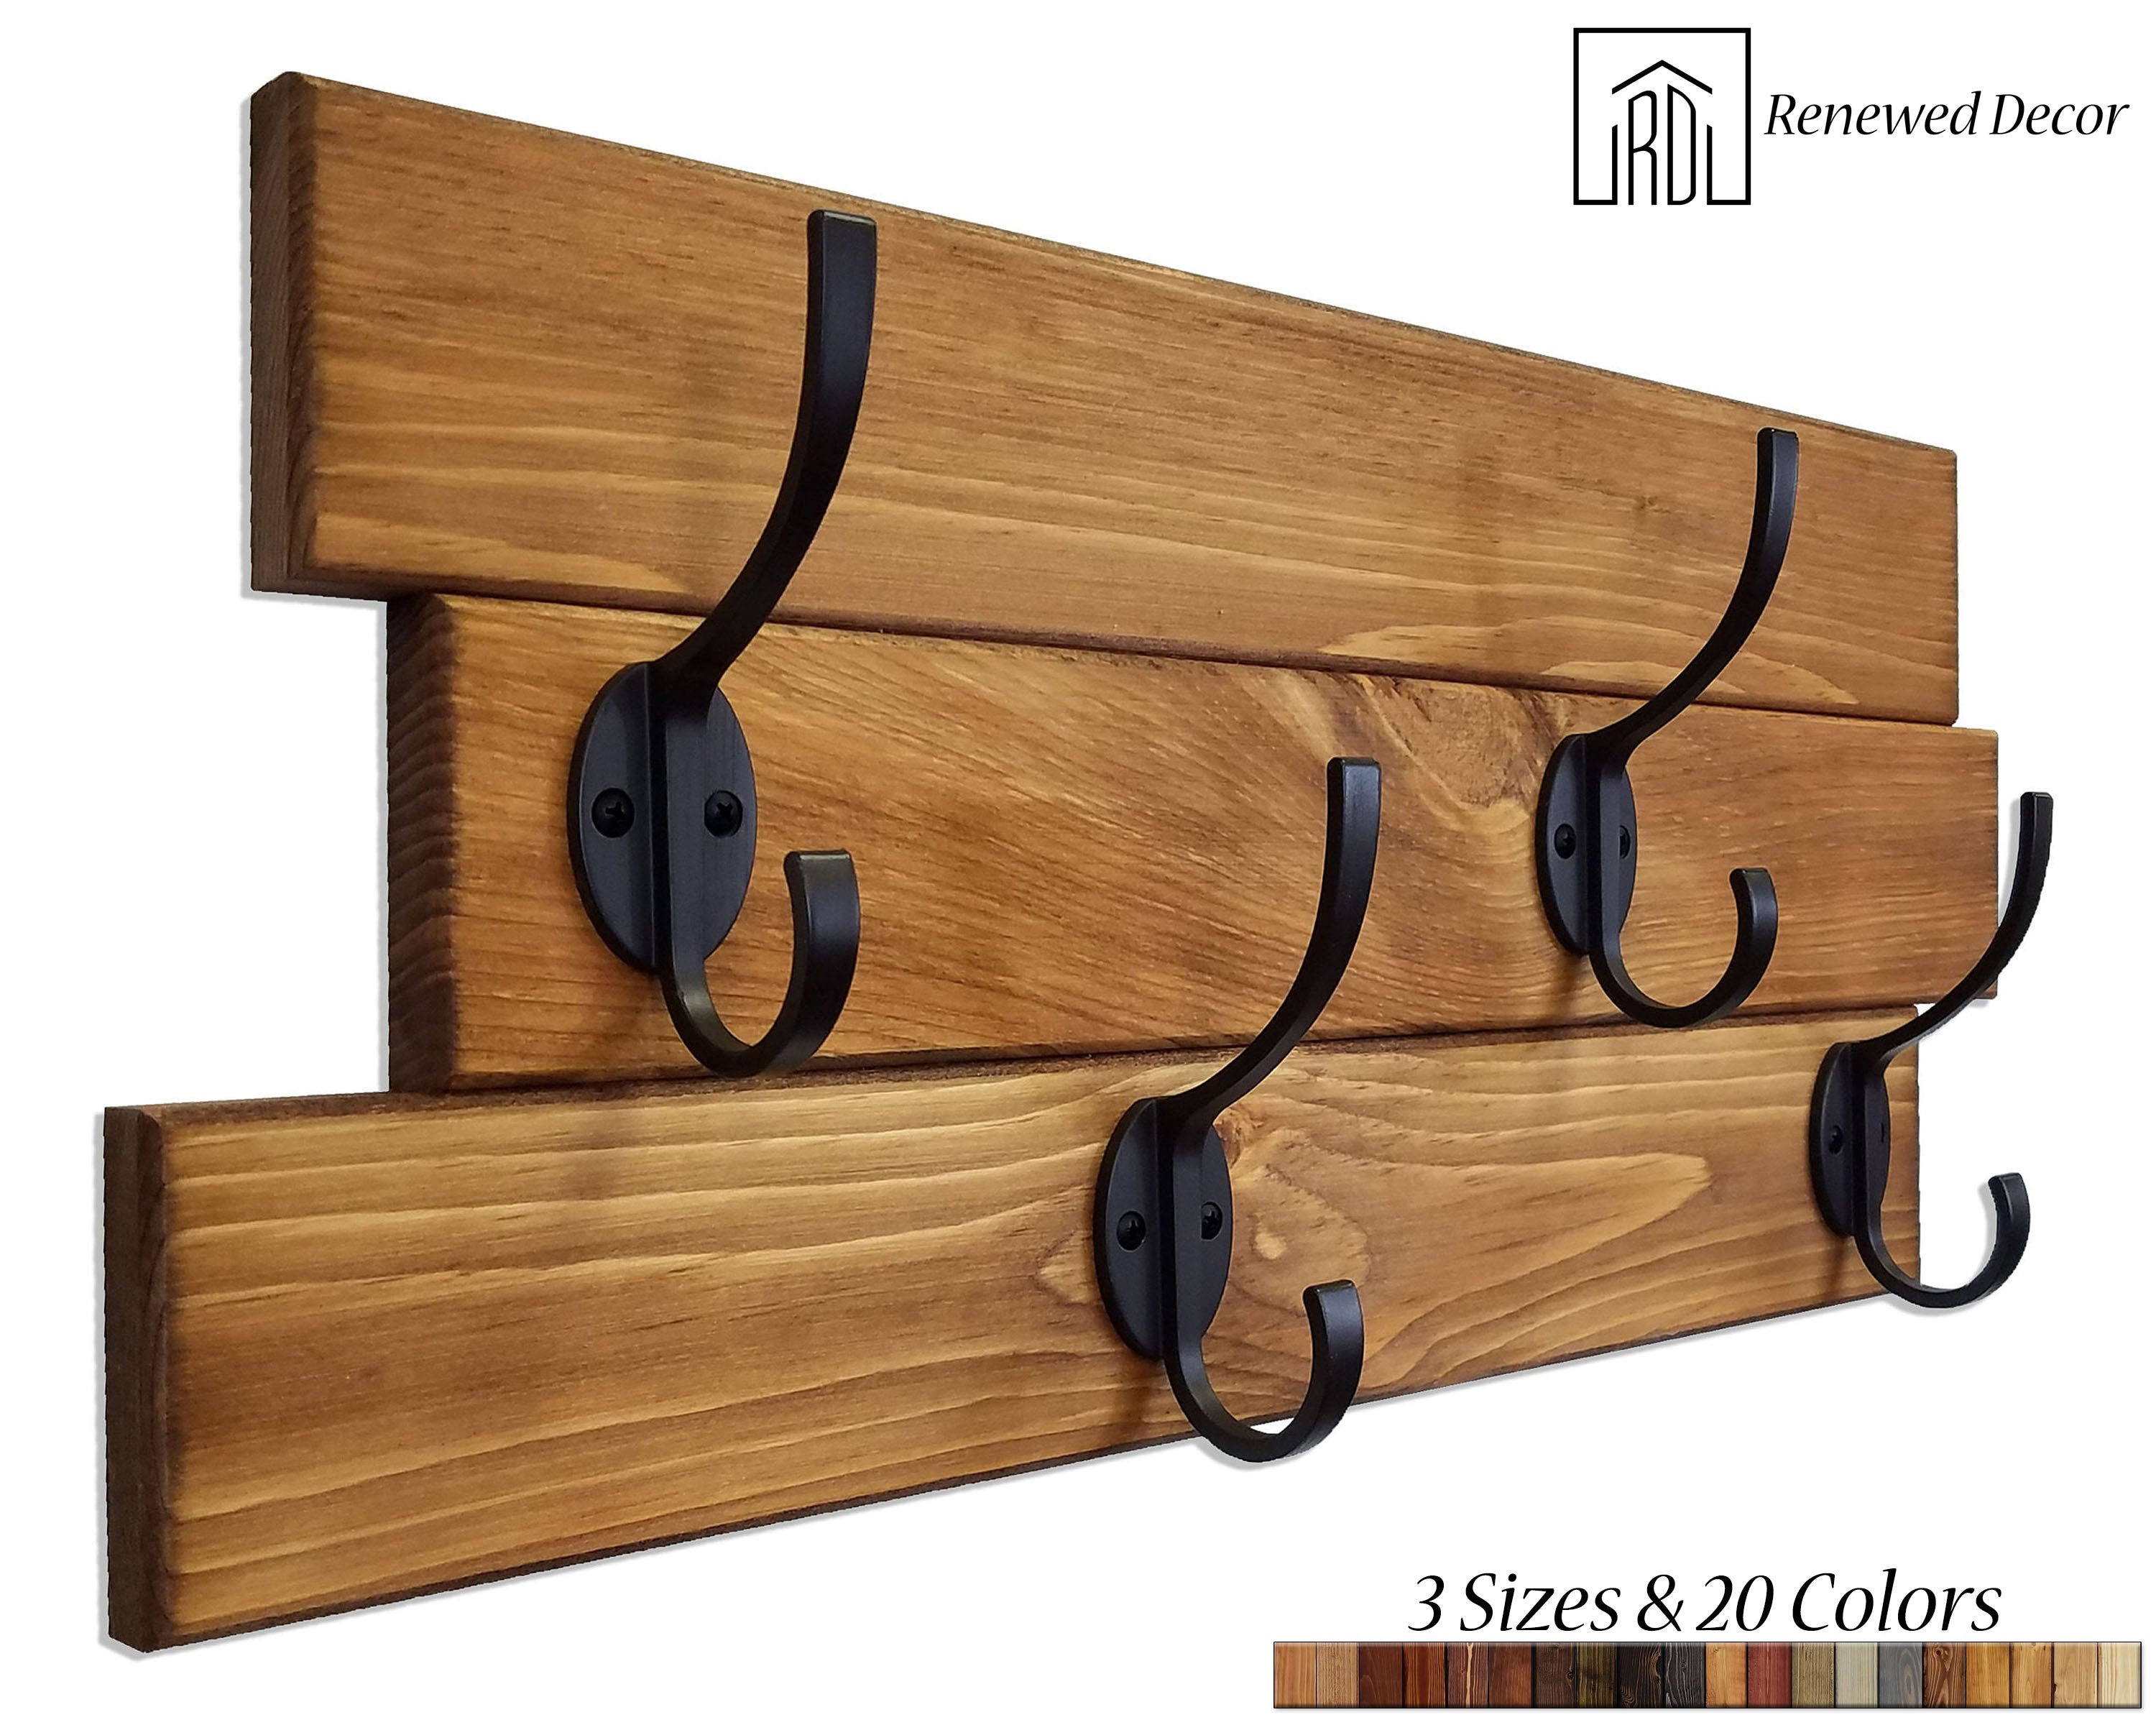 Shelf With Hooks and Ledge Shelf for Pictures Kitchen Decor Wooden